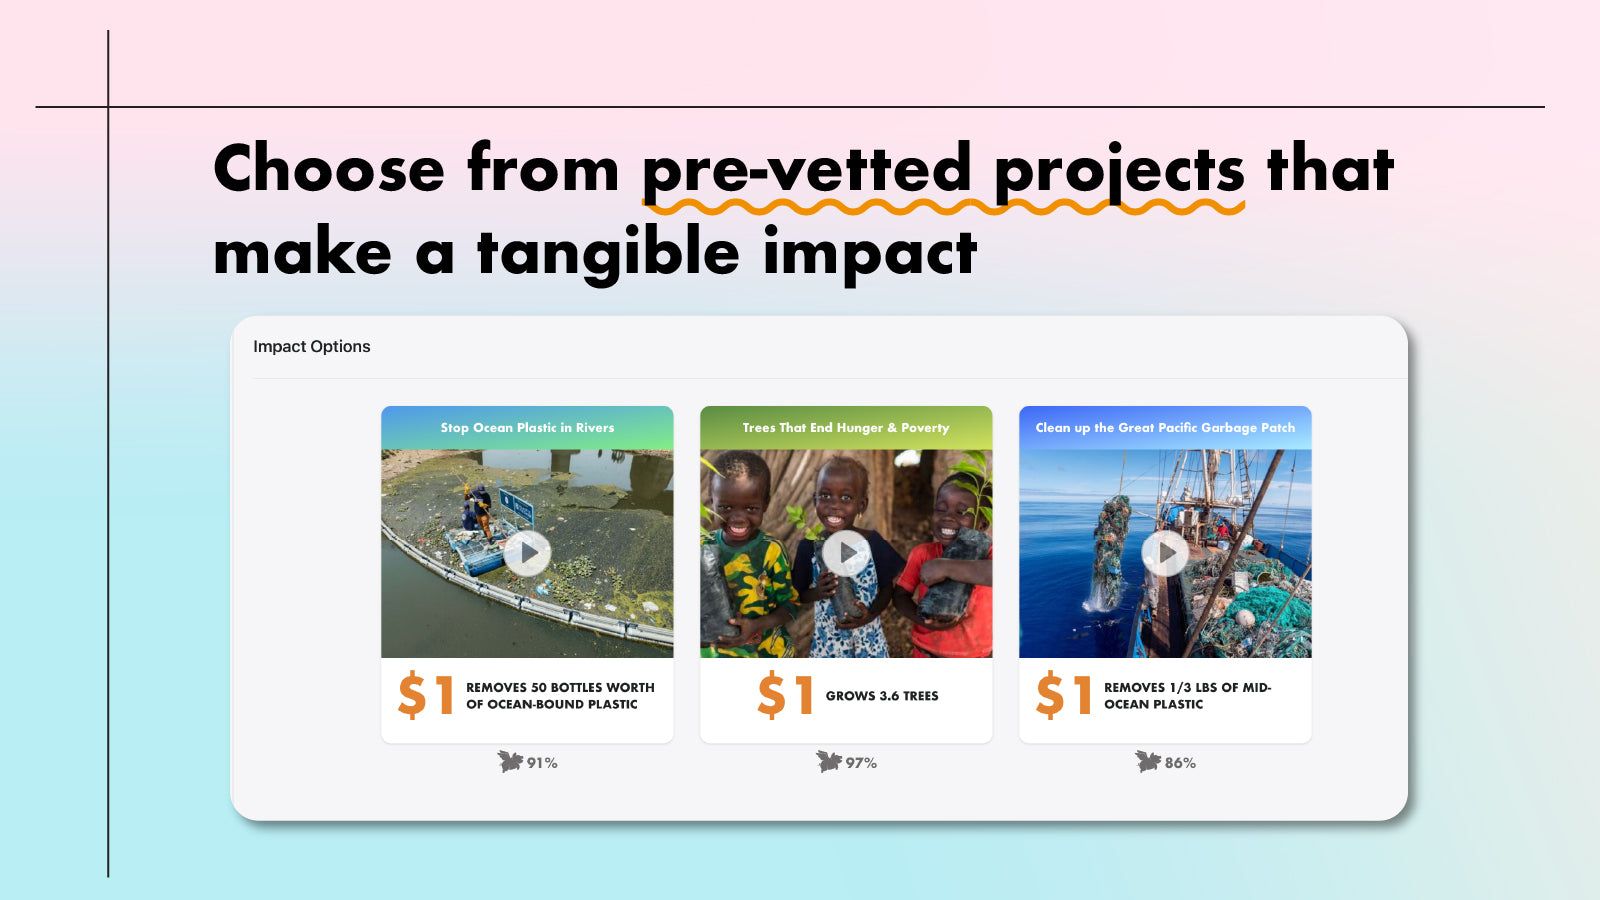 Choose from pre-vetted projects that make a tangible impact